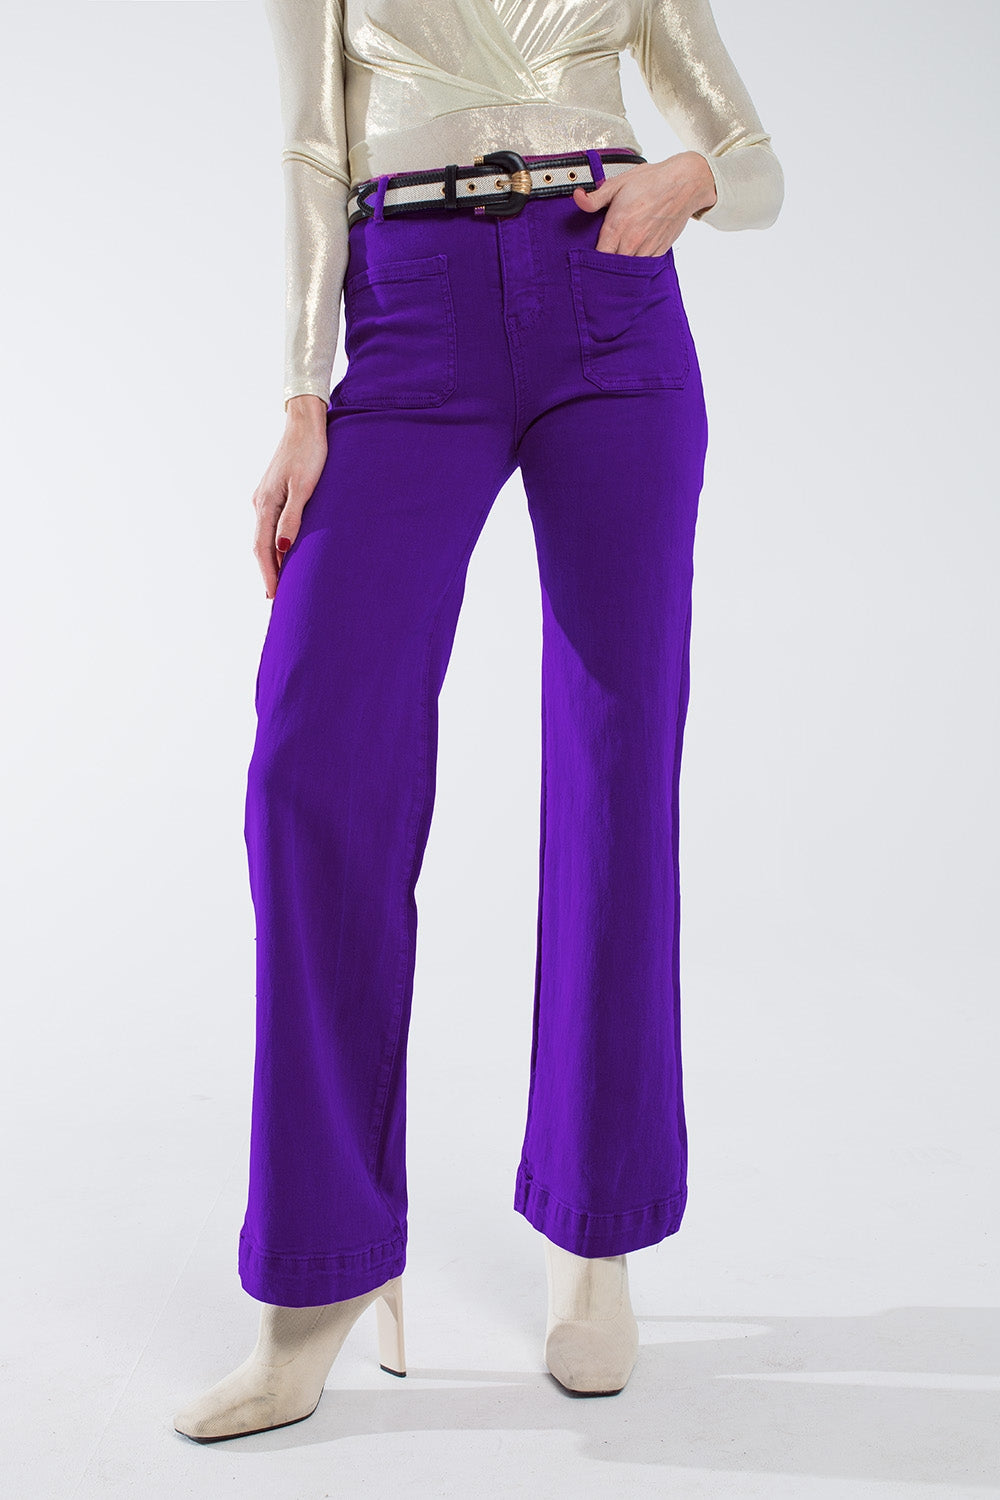 Q2 Purple flair jeans with large front pockets